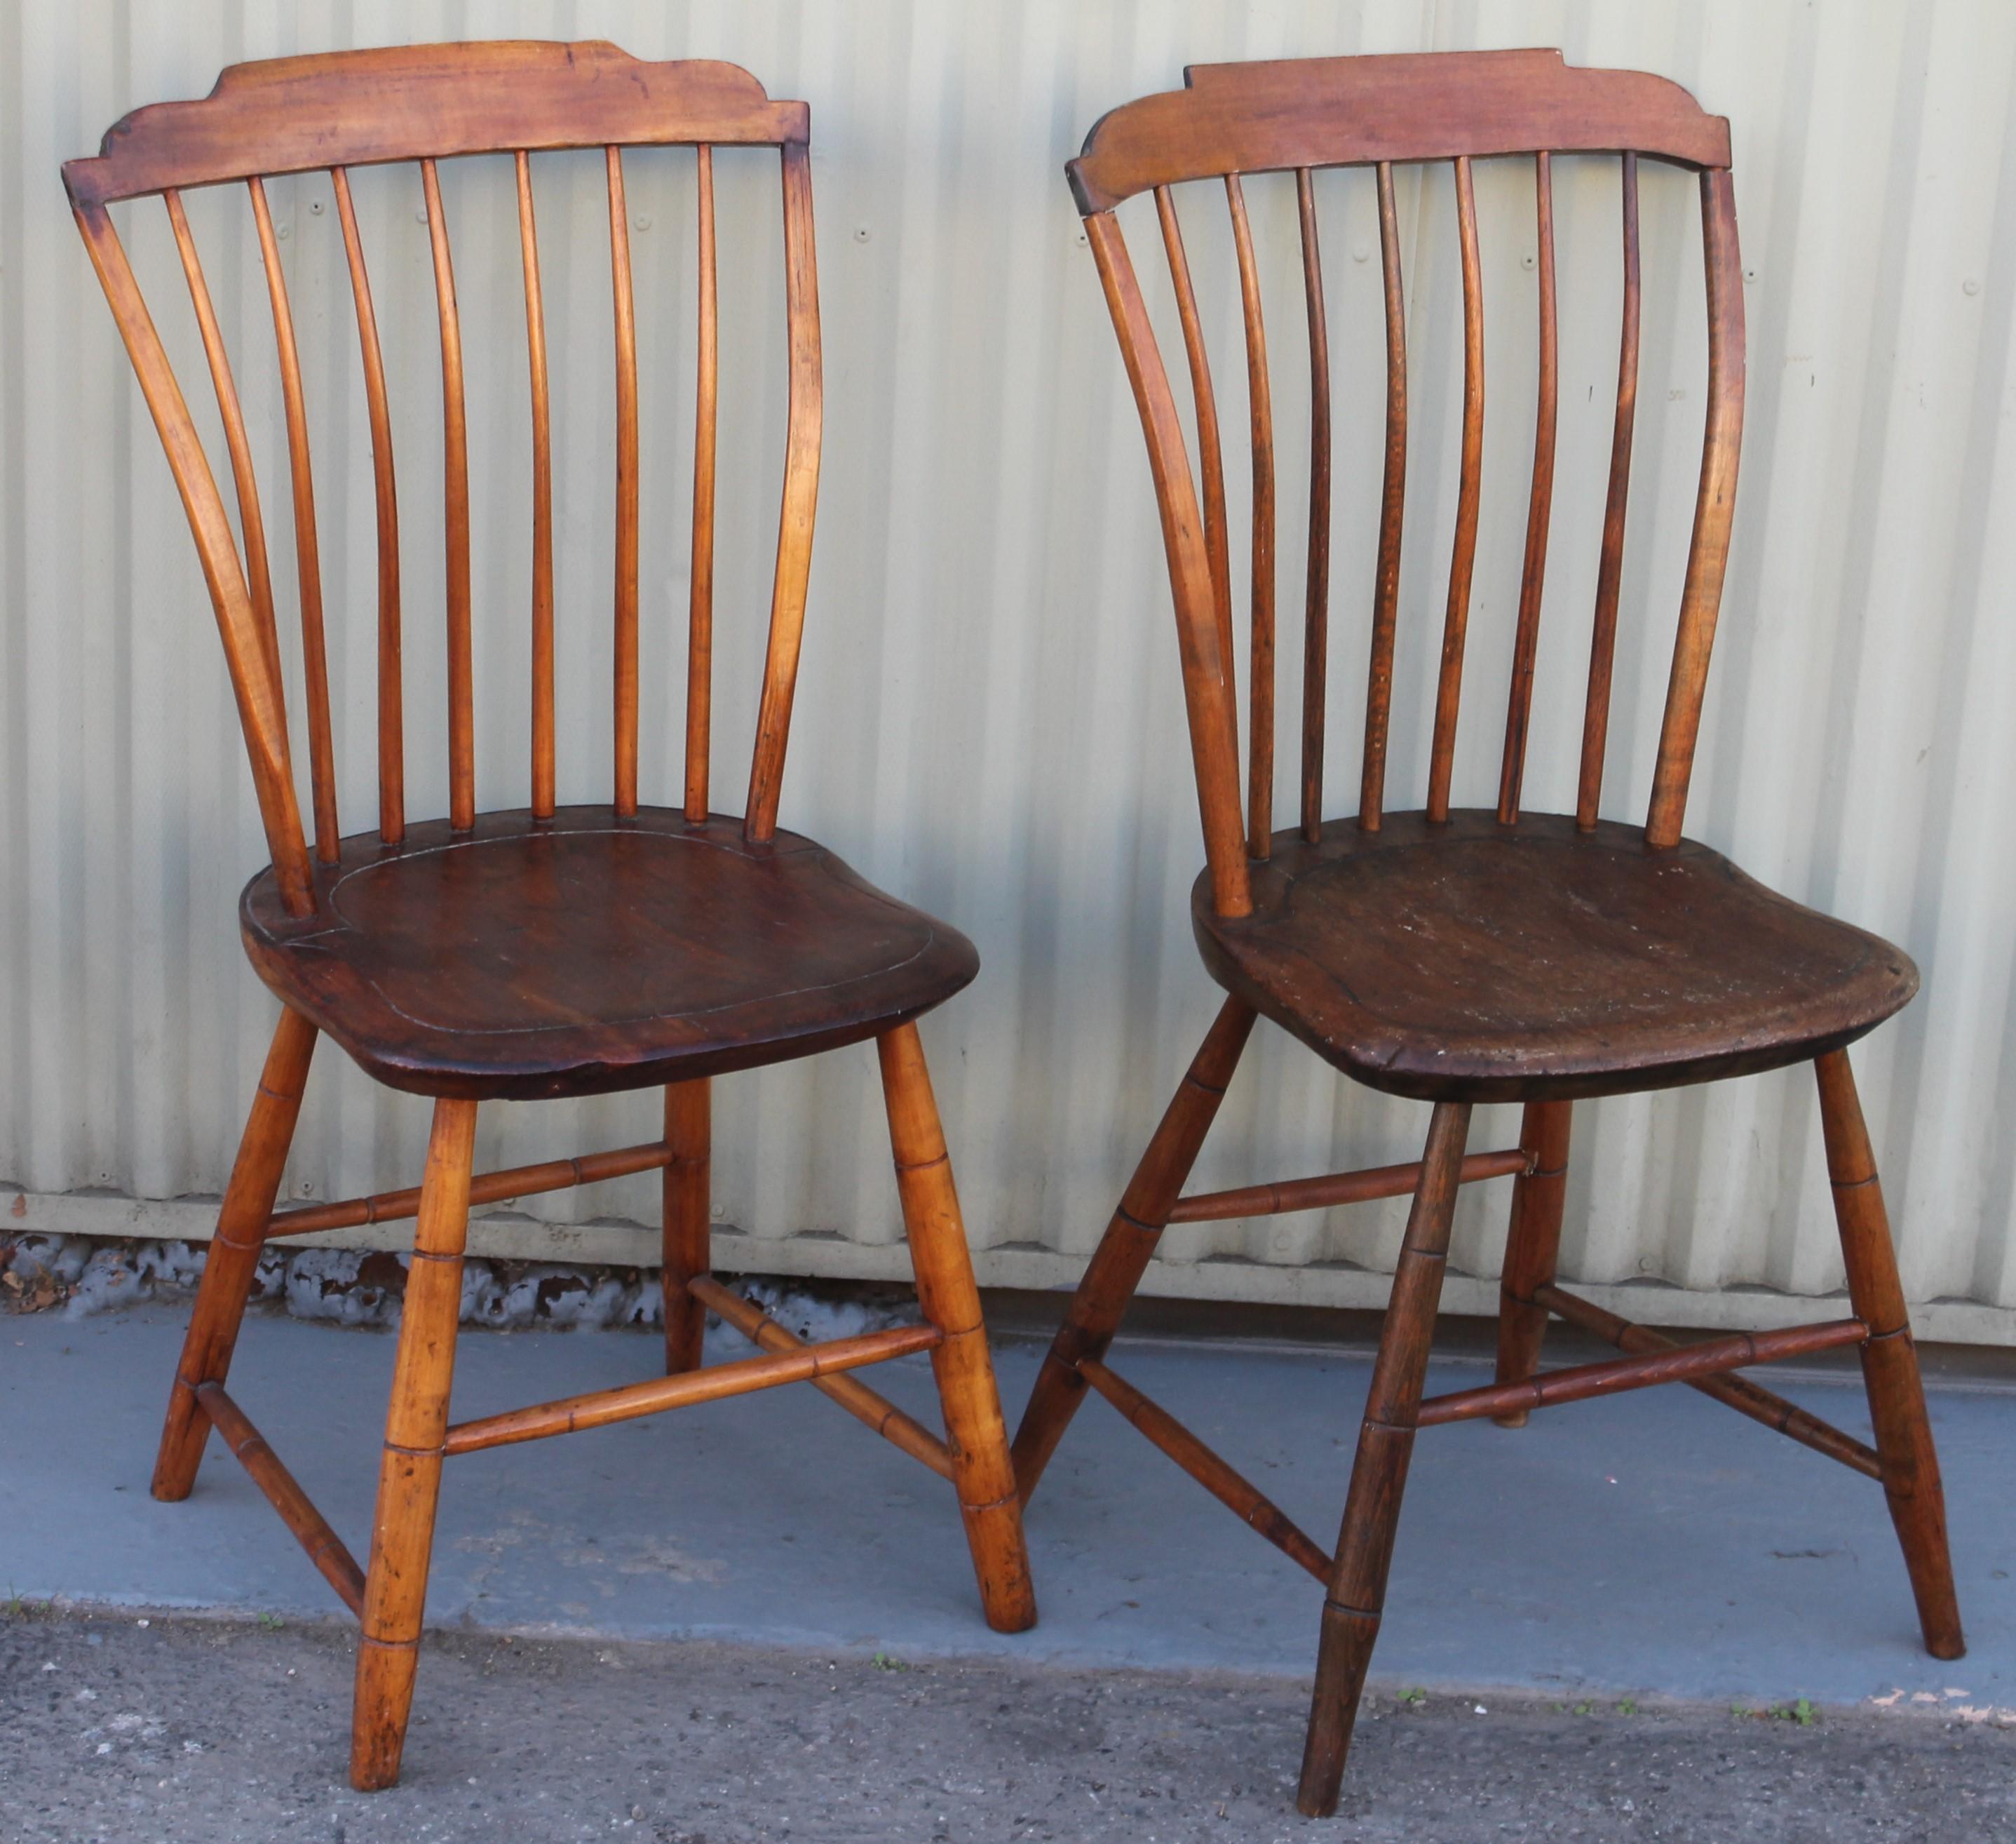 This fine pair of step down Windsor chairs are in fine condition. One chair is signed underneath the seat. Both chairs are sturdy and comfortable.